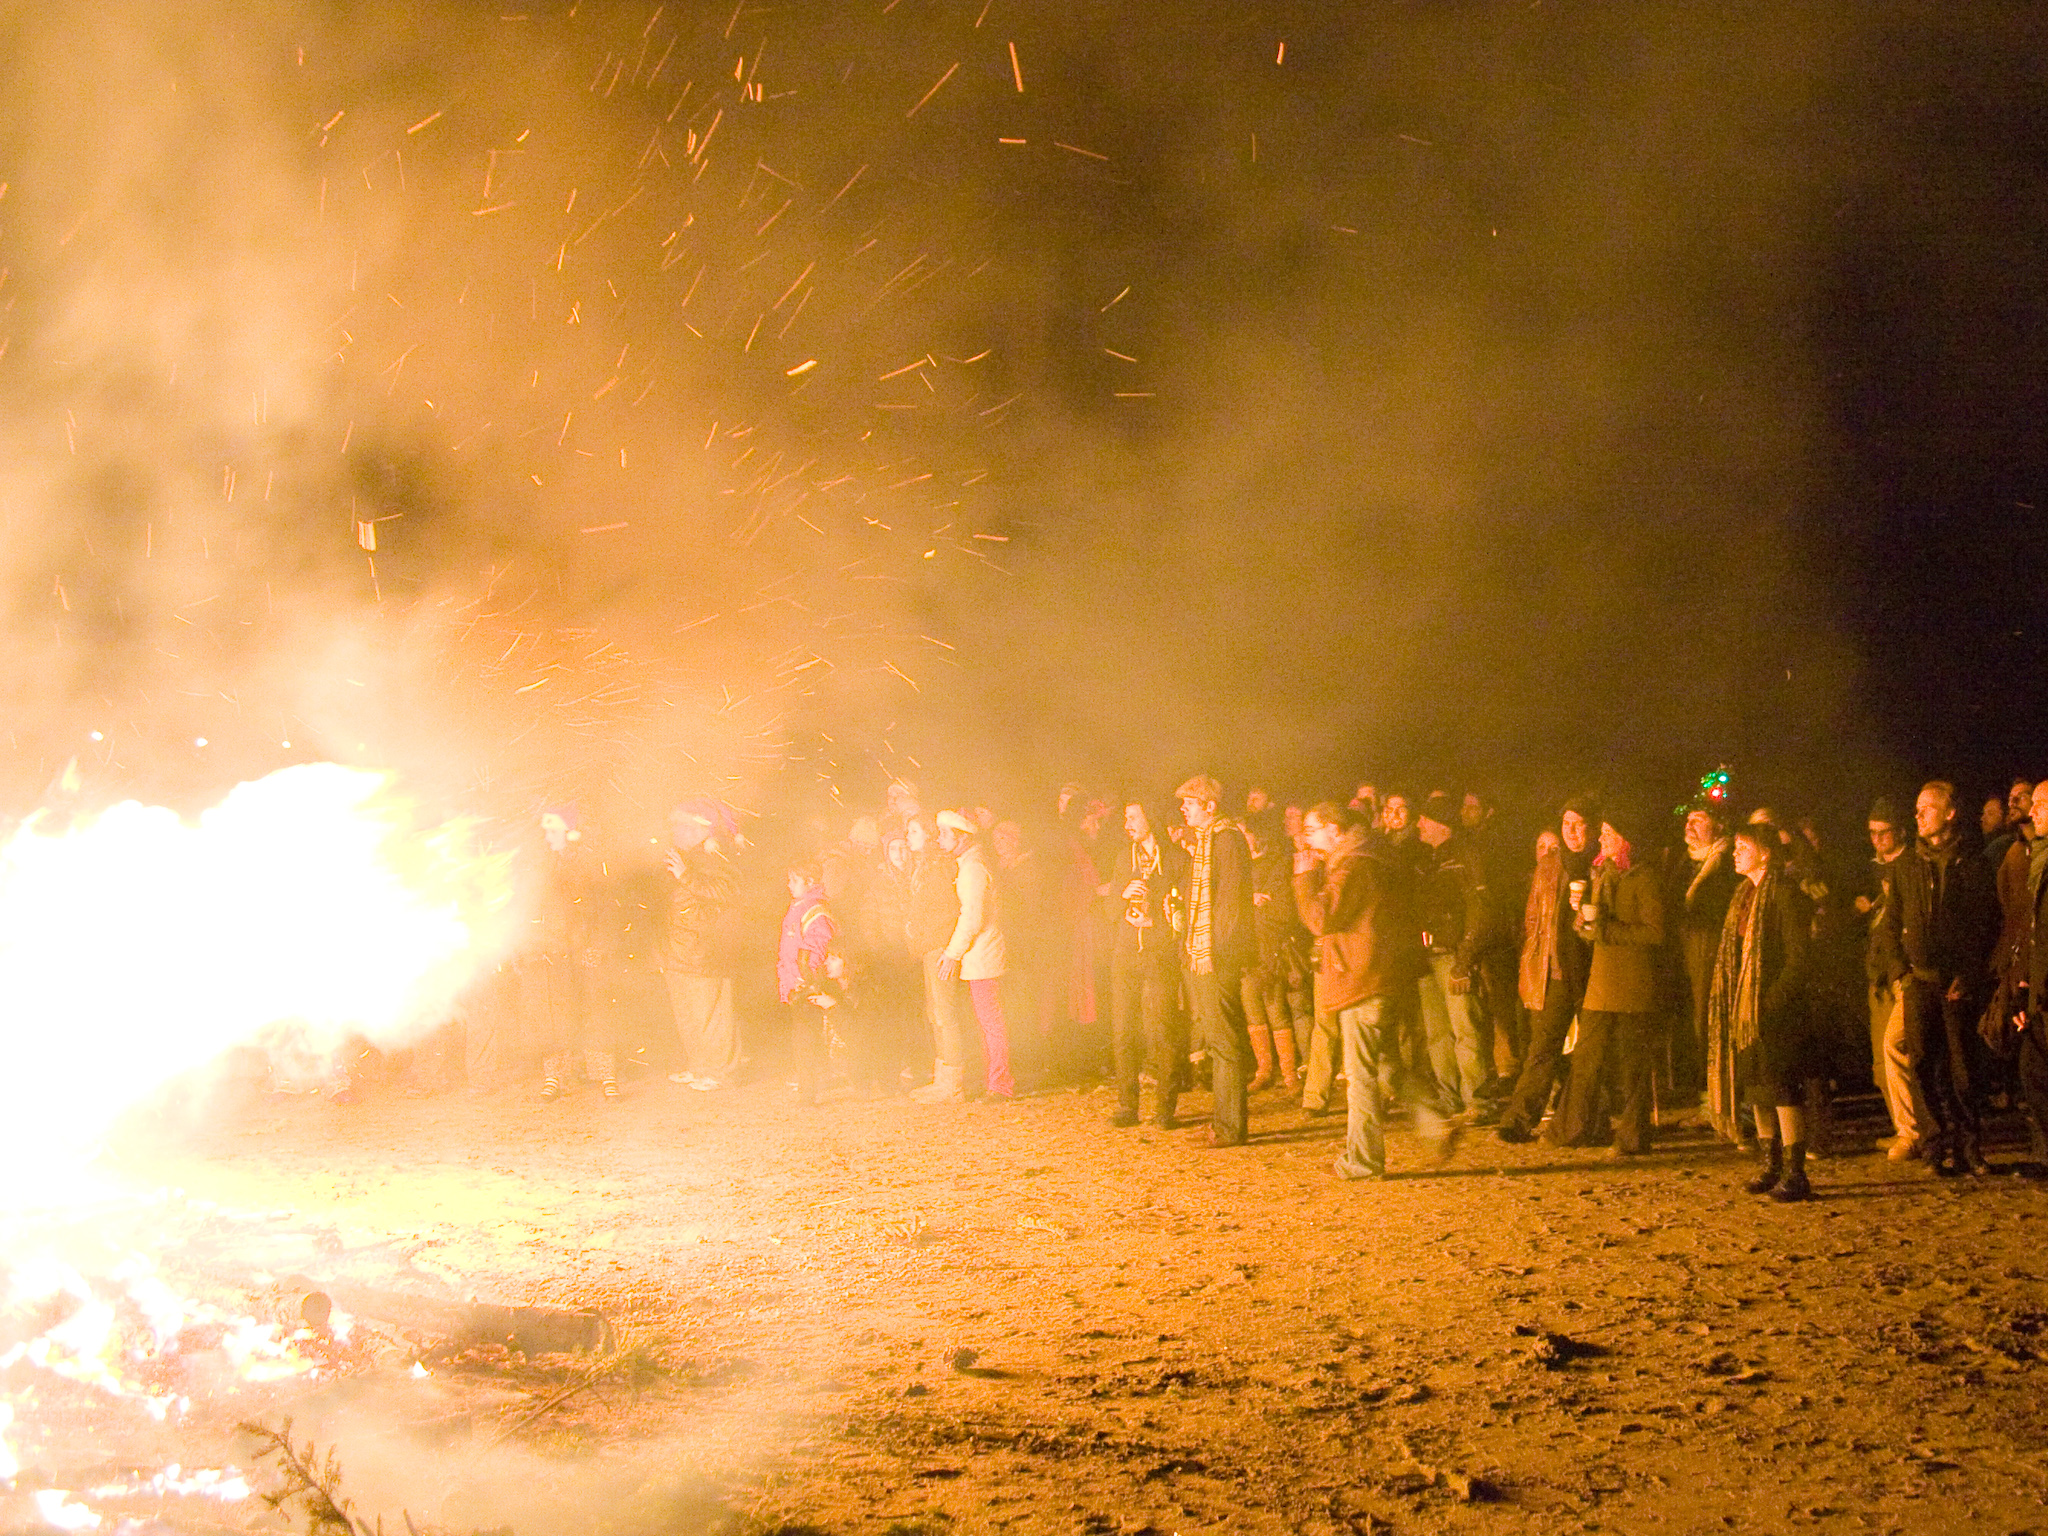 people are gathered around a bonfire in the dirt